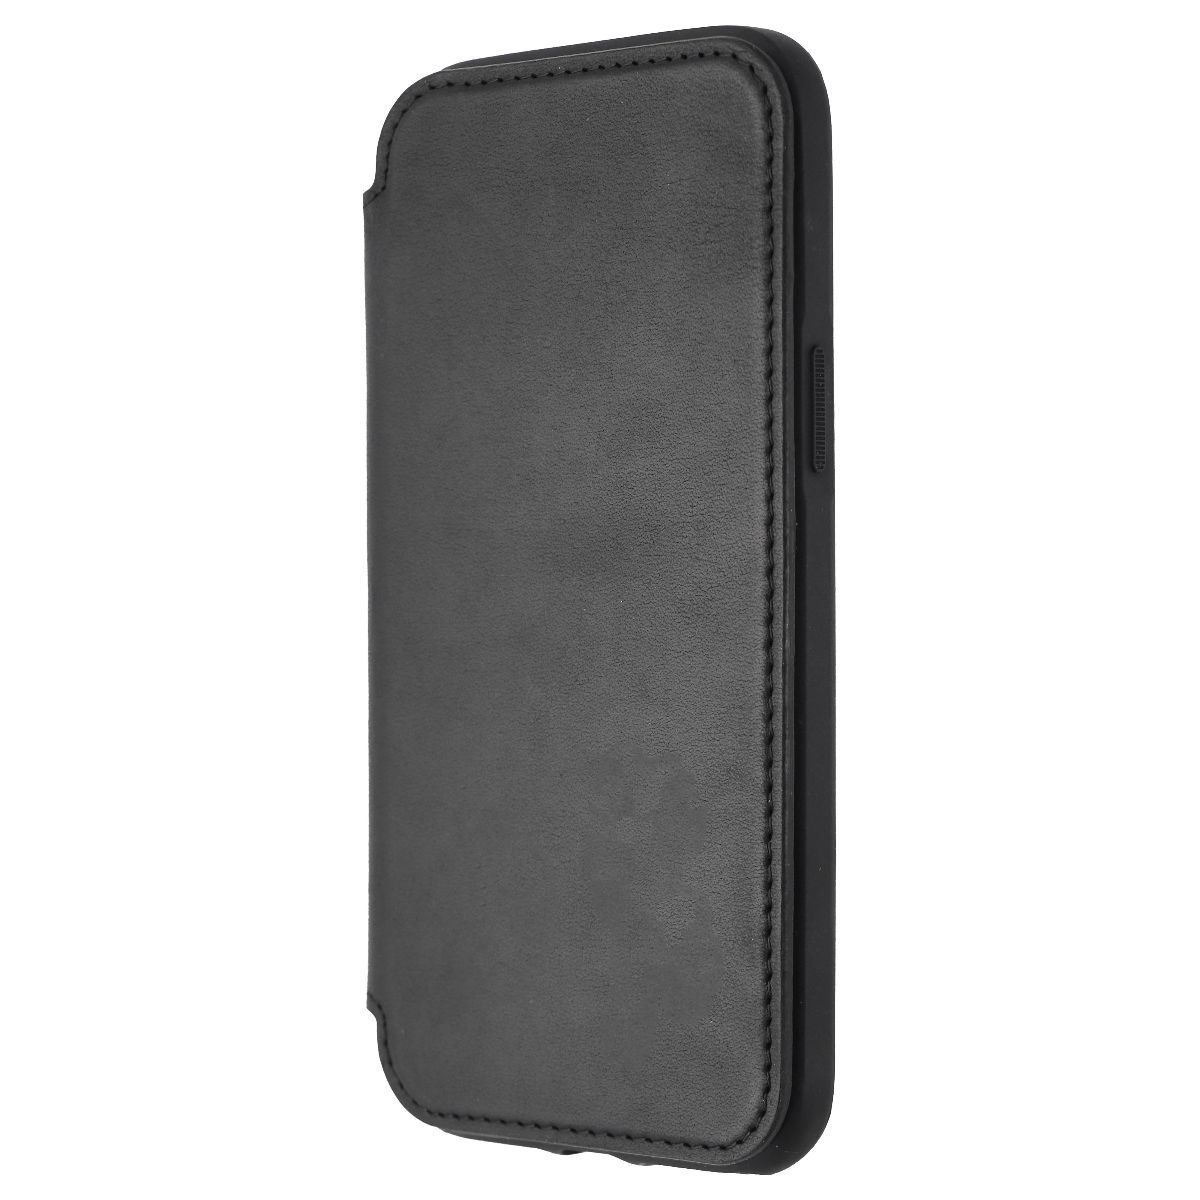 Nomad Rugged Folio Wallet Case For IPhone 12 Pro Max - Black